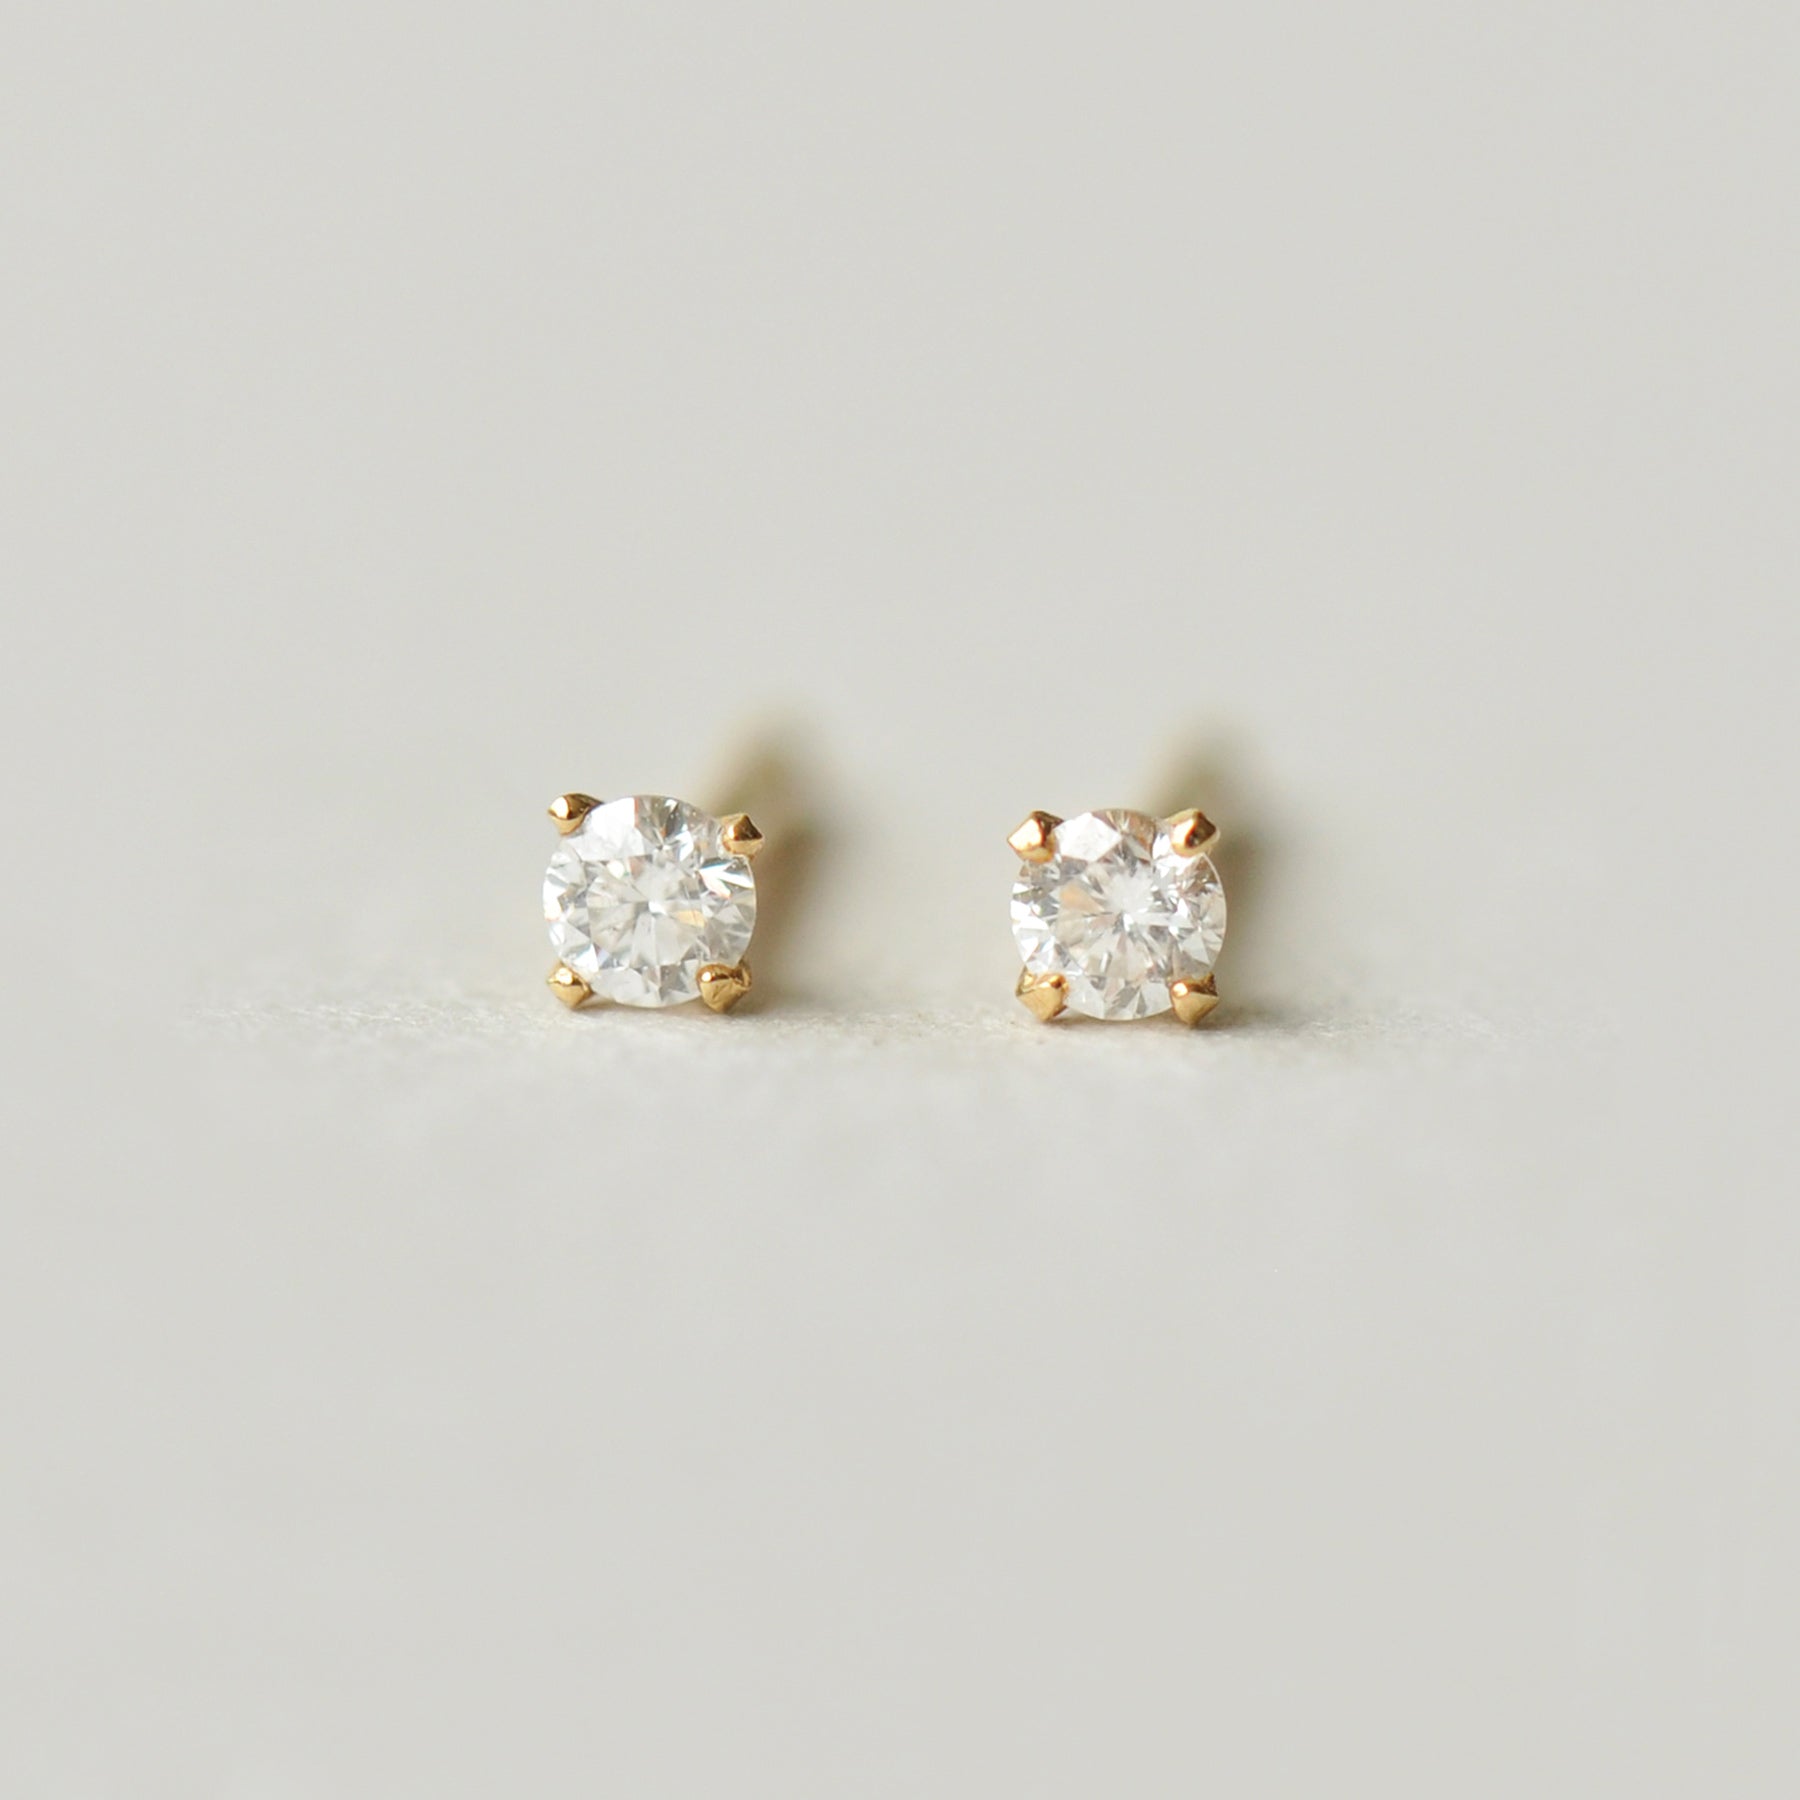 [Second Earrings] 18K Yellow Gold Diamond Earrings 0.08ct - Product Image